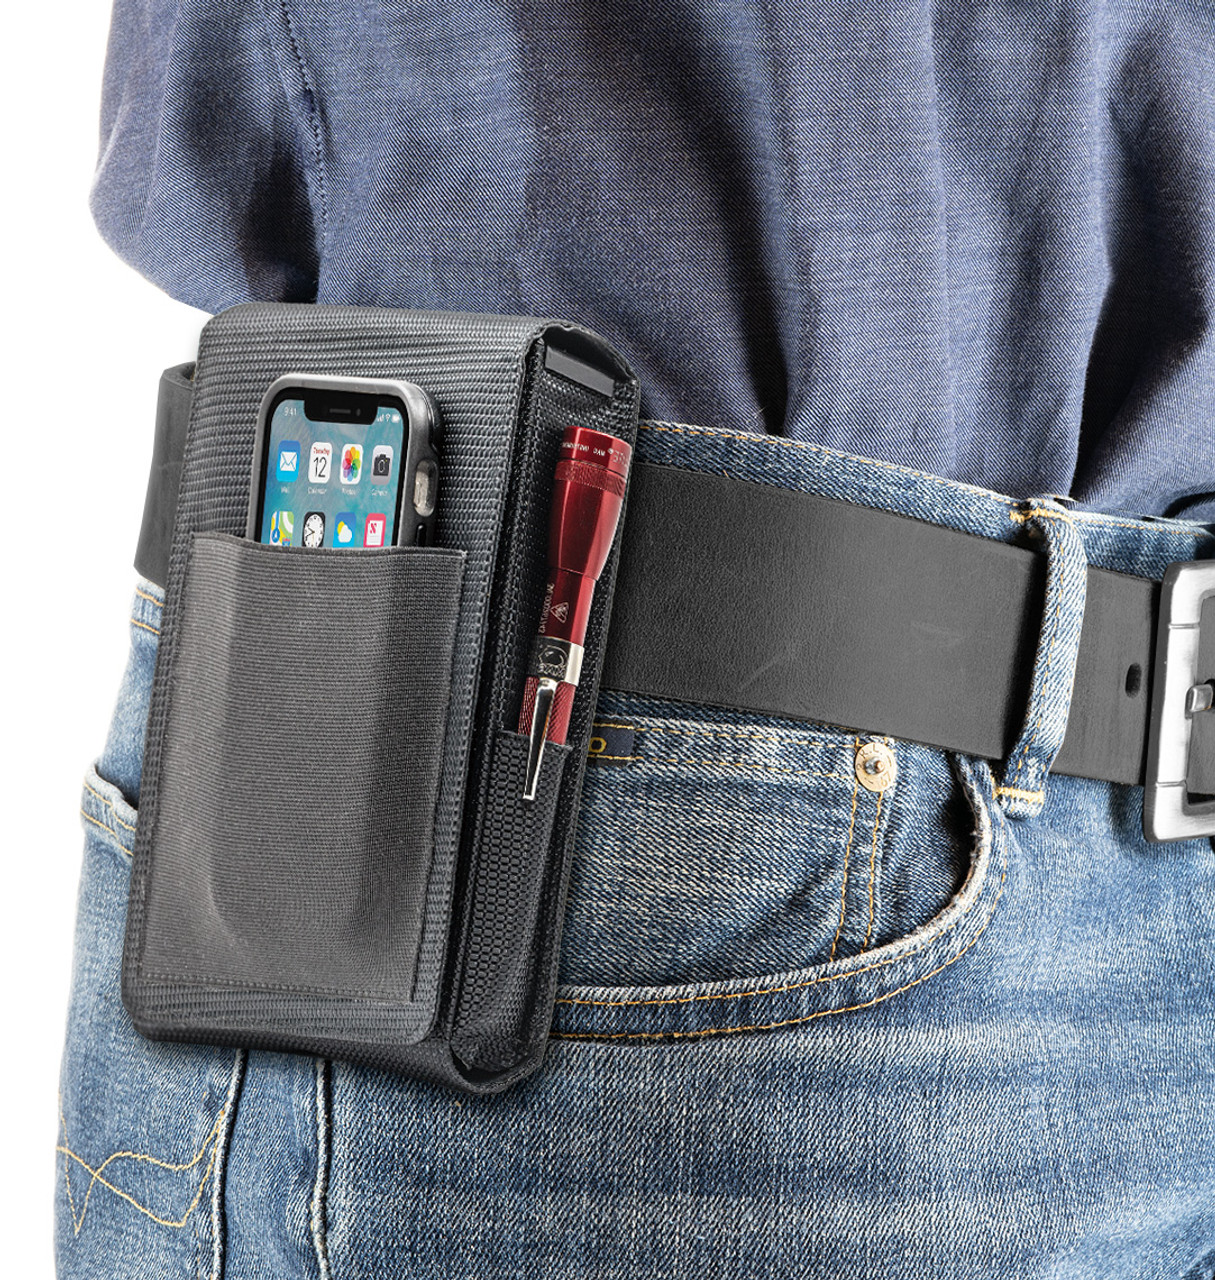 The Colt Lightweight Defender Perfect Holster